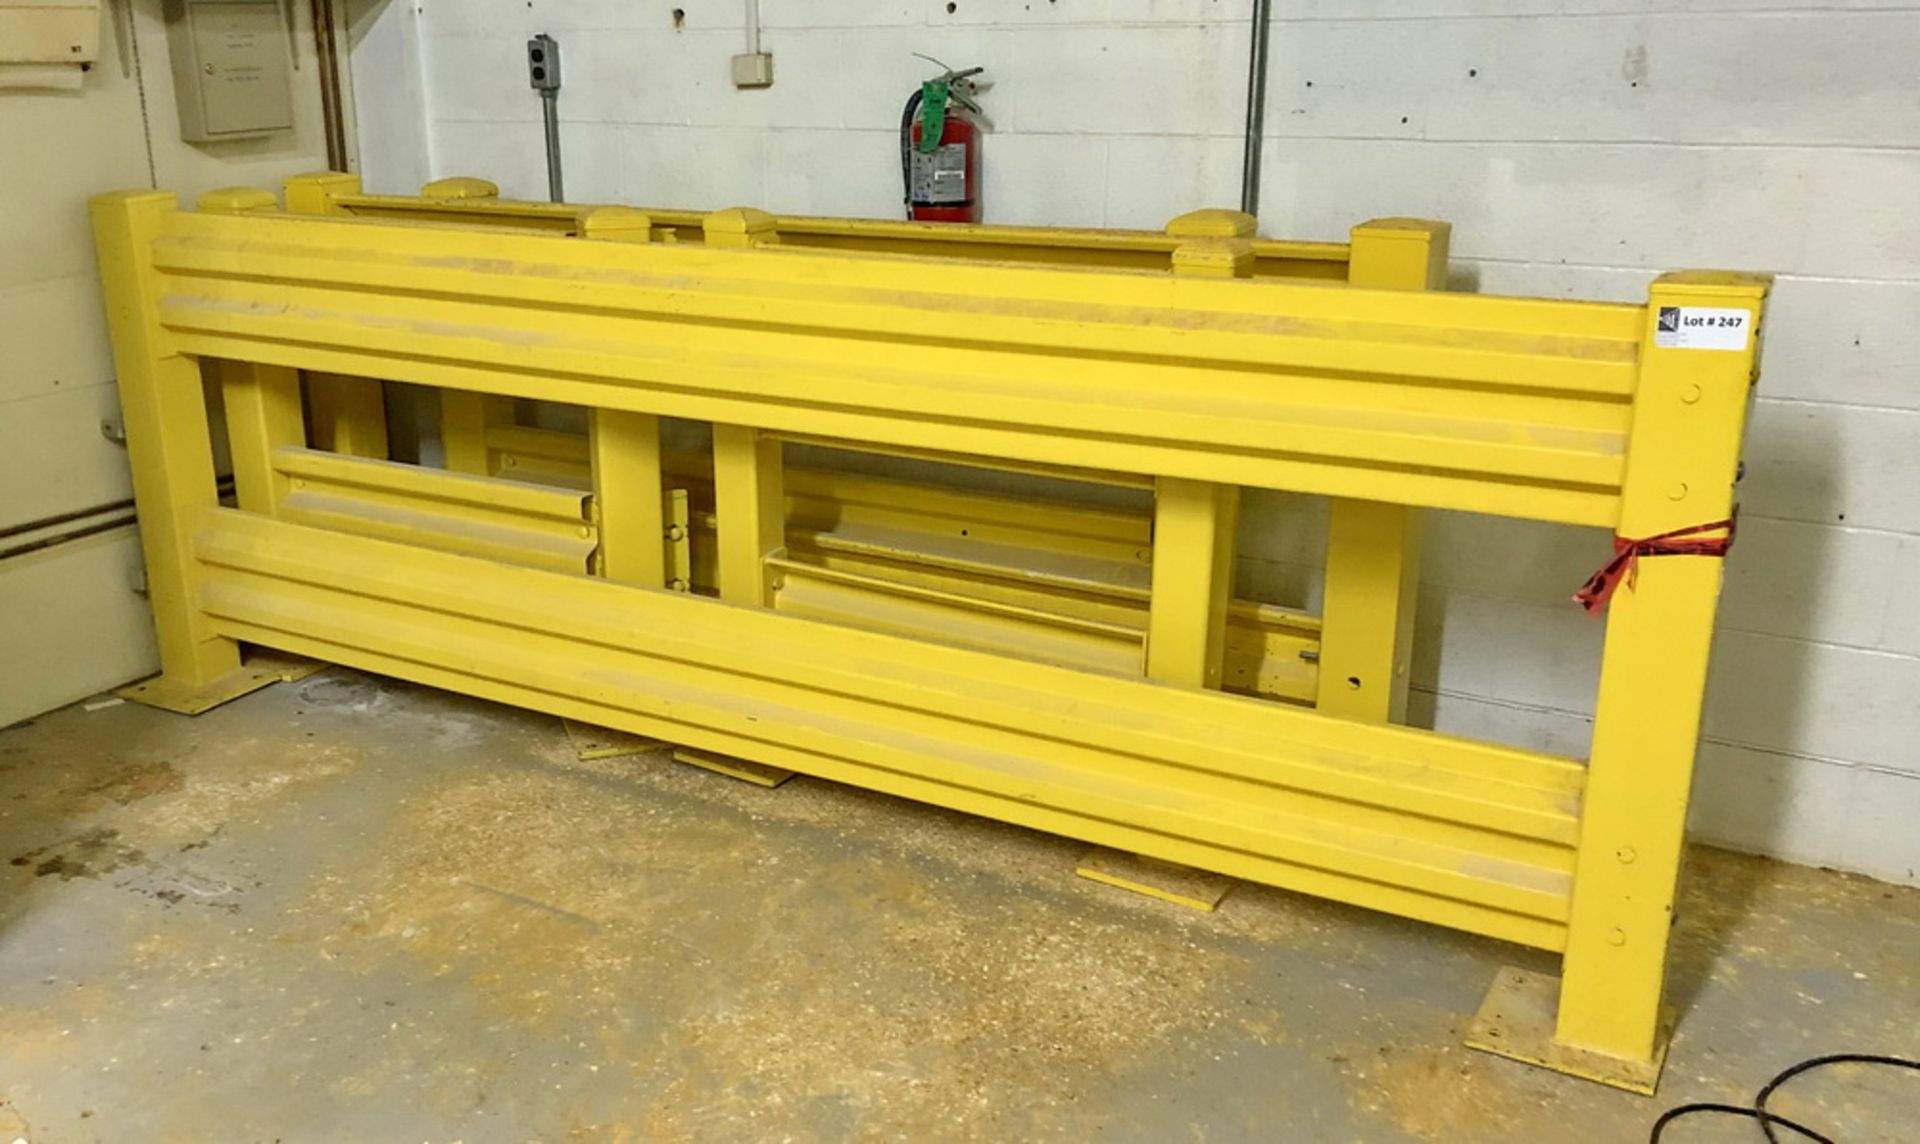 Lot of yellow steel wall protection guard rails, will require a full trailer